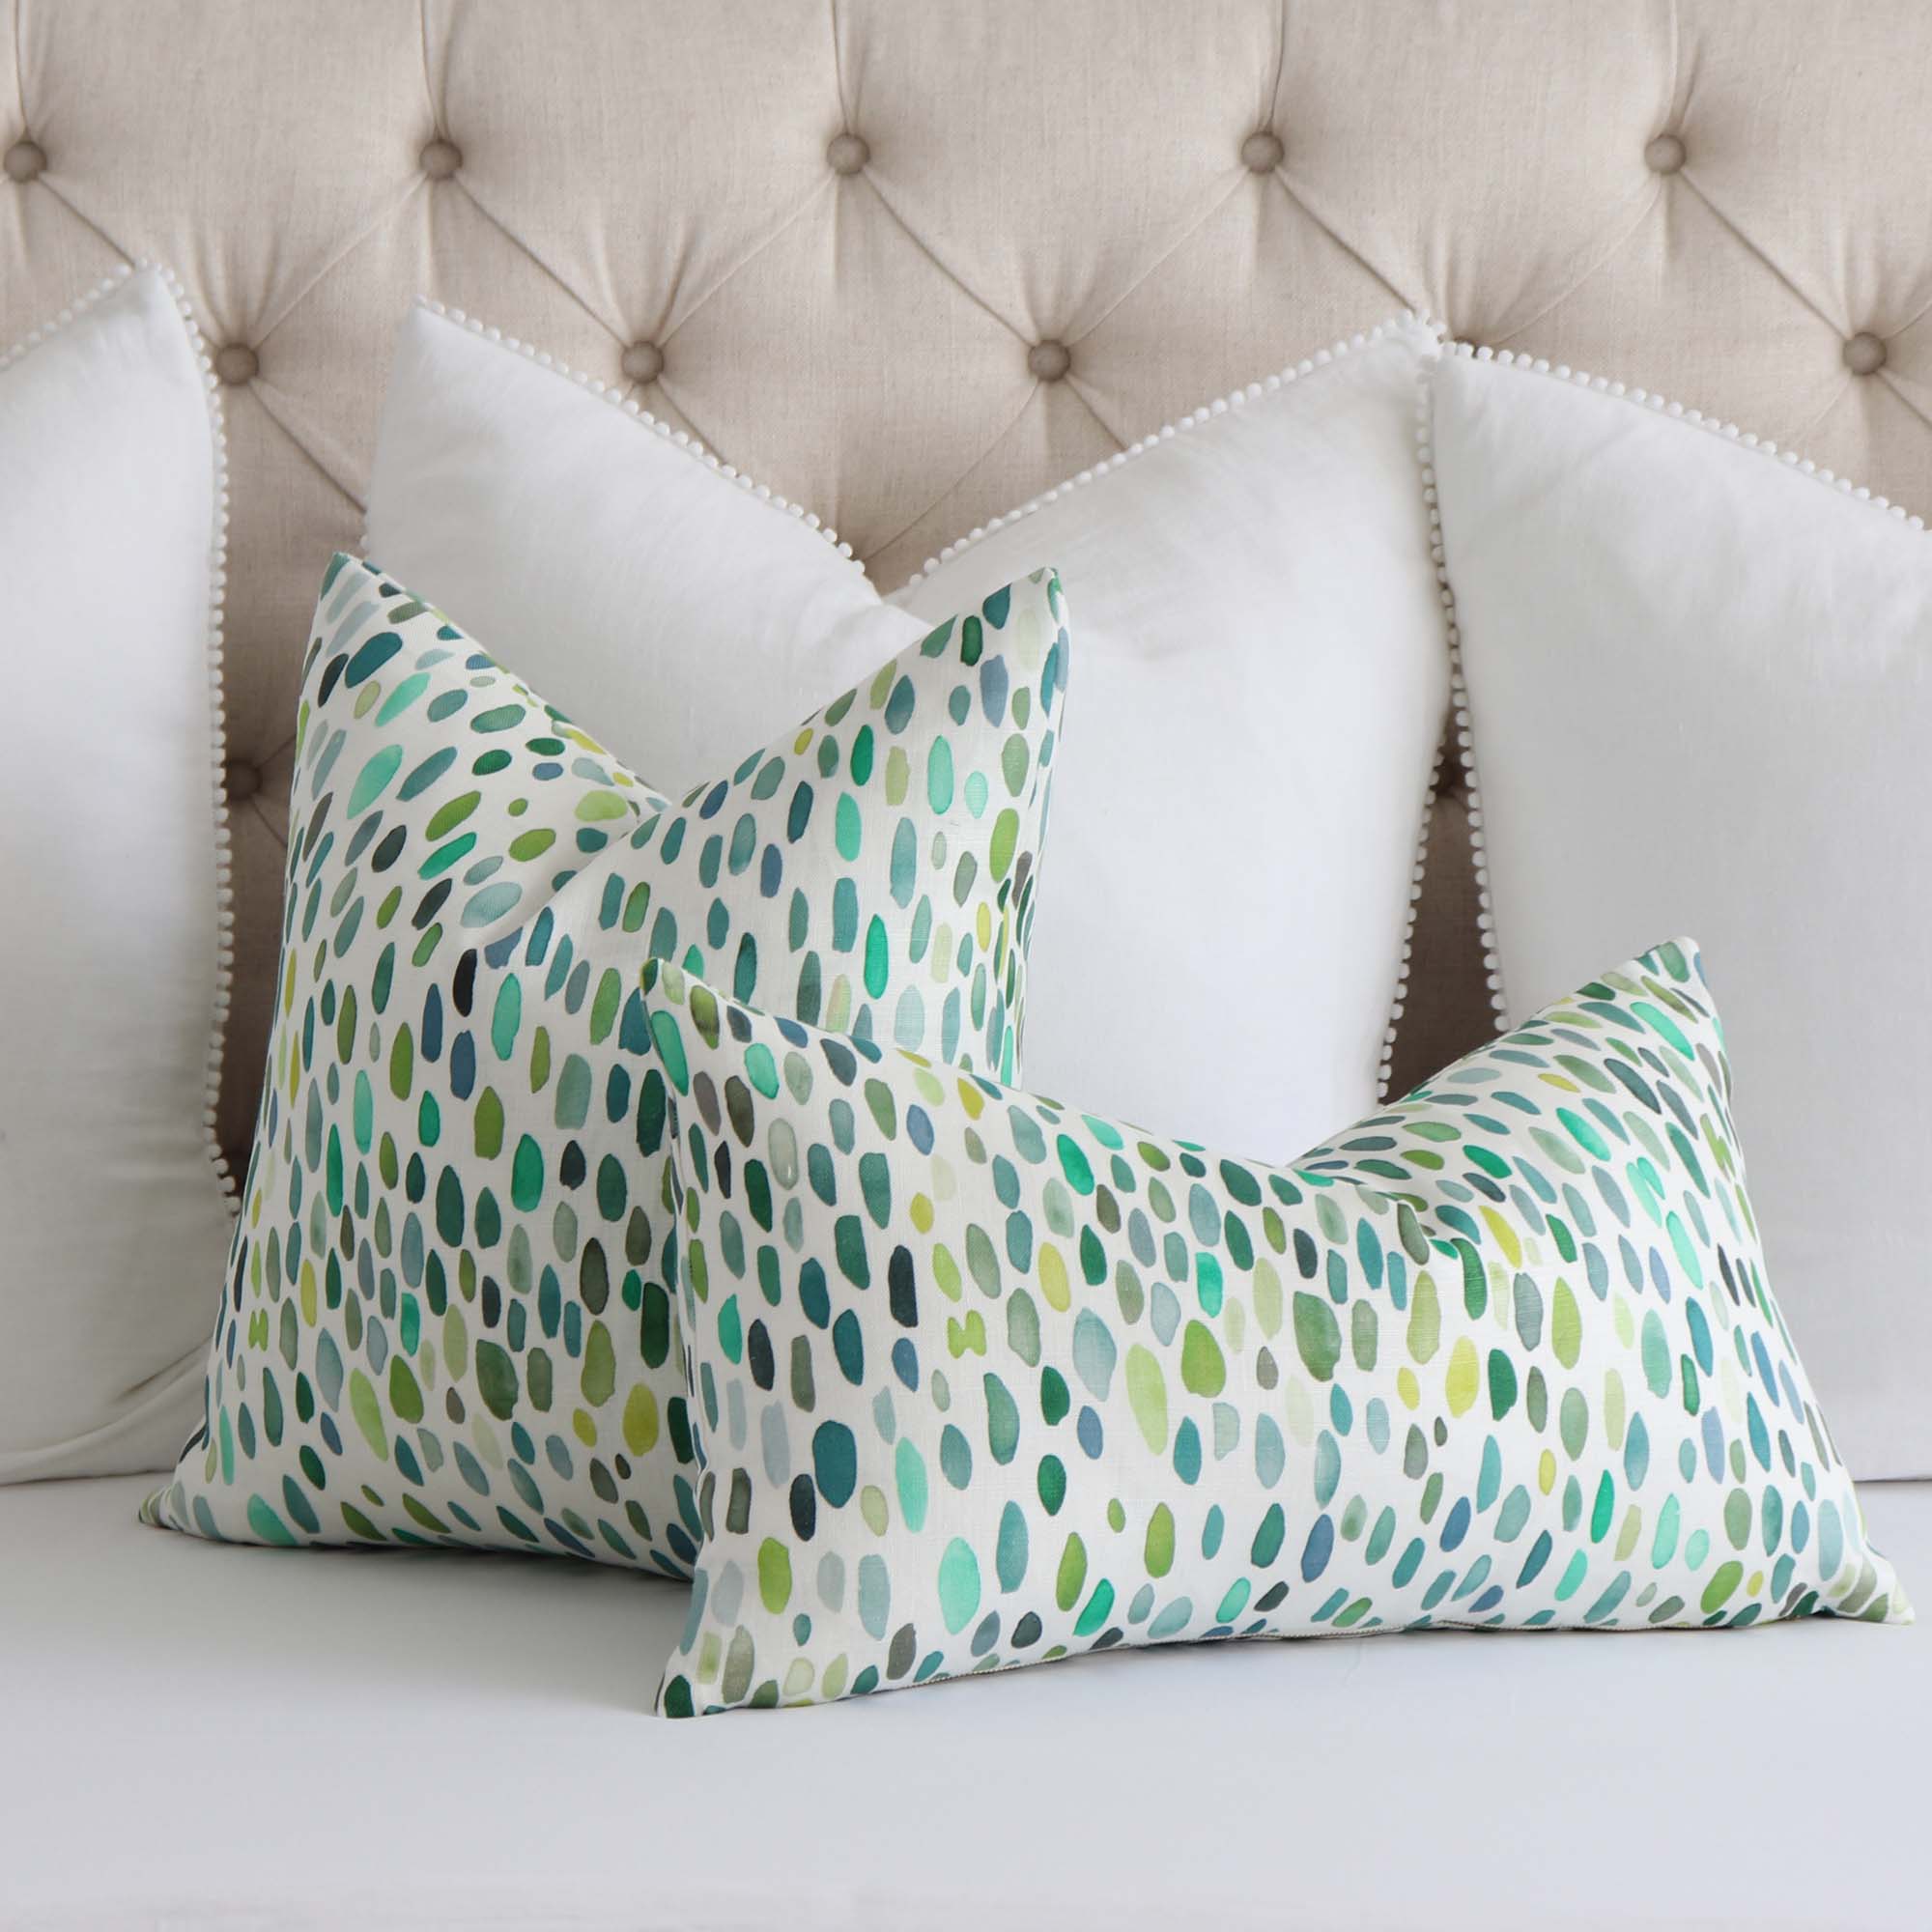 Modern Pillow Set of 3, Throw Pillows for Couch Green, Cream Floral Pillow  Combo, Cushion Cover Set, Olive Grey Cream Pillows 22x22, 20x20 